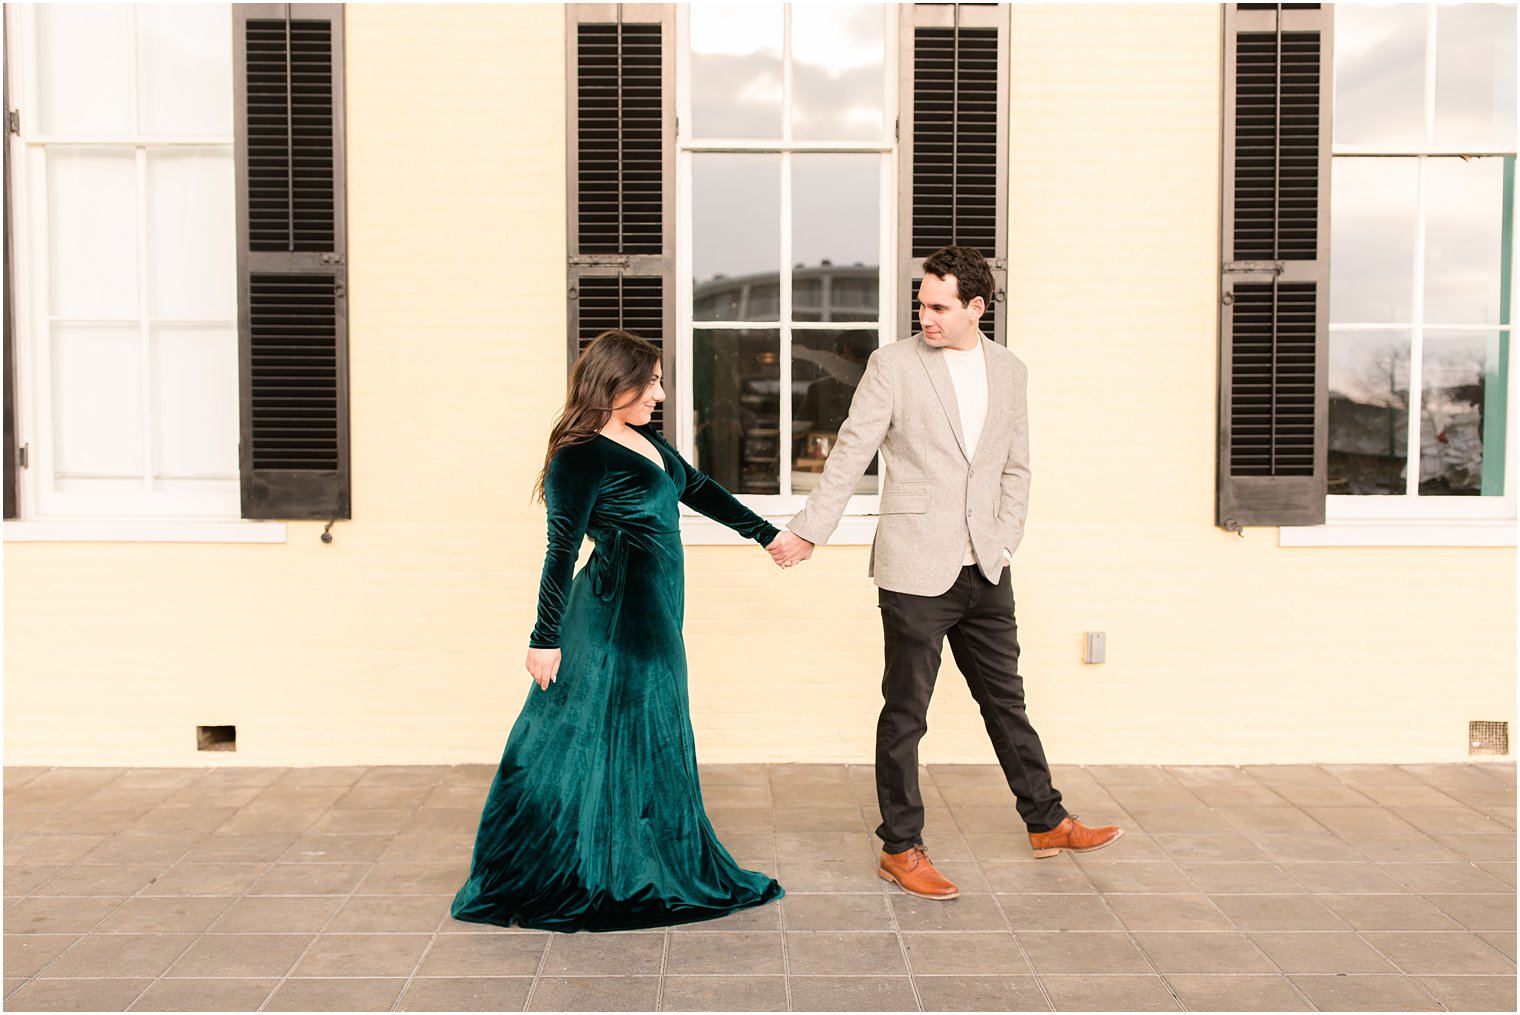 Couple walking in front of Congress Hall in Cape May for their engagement photos